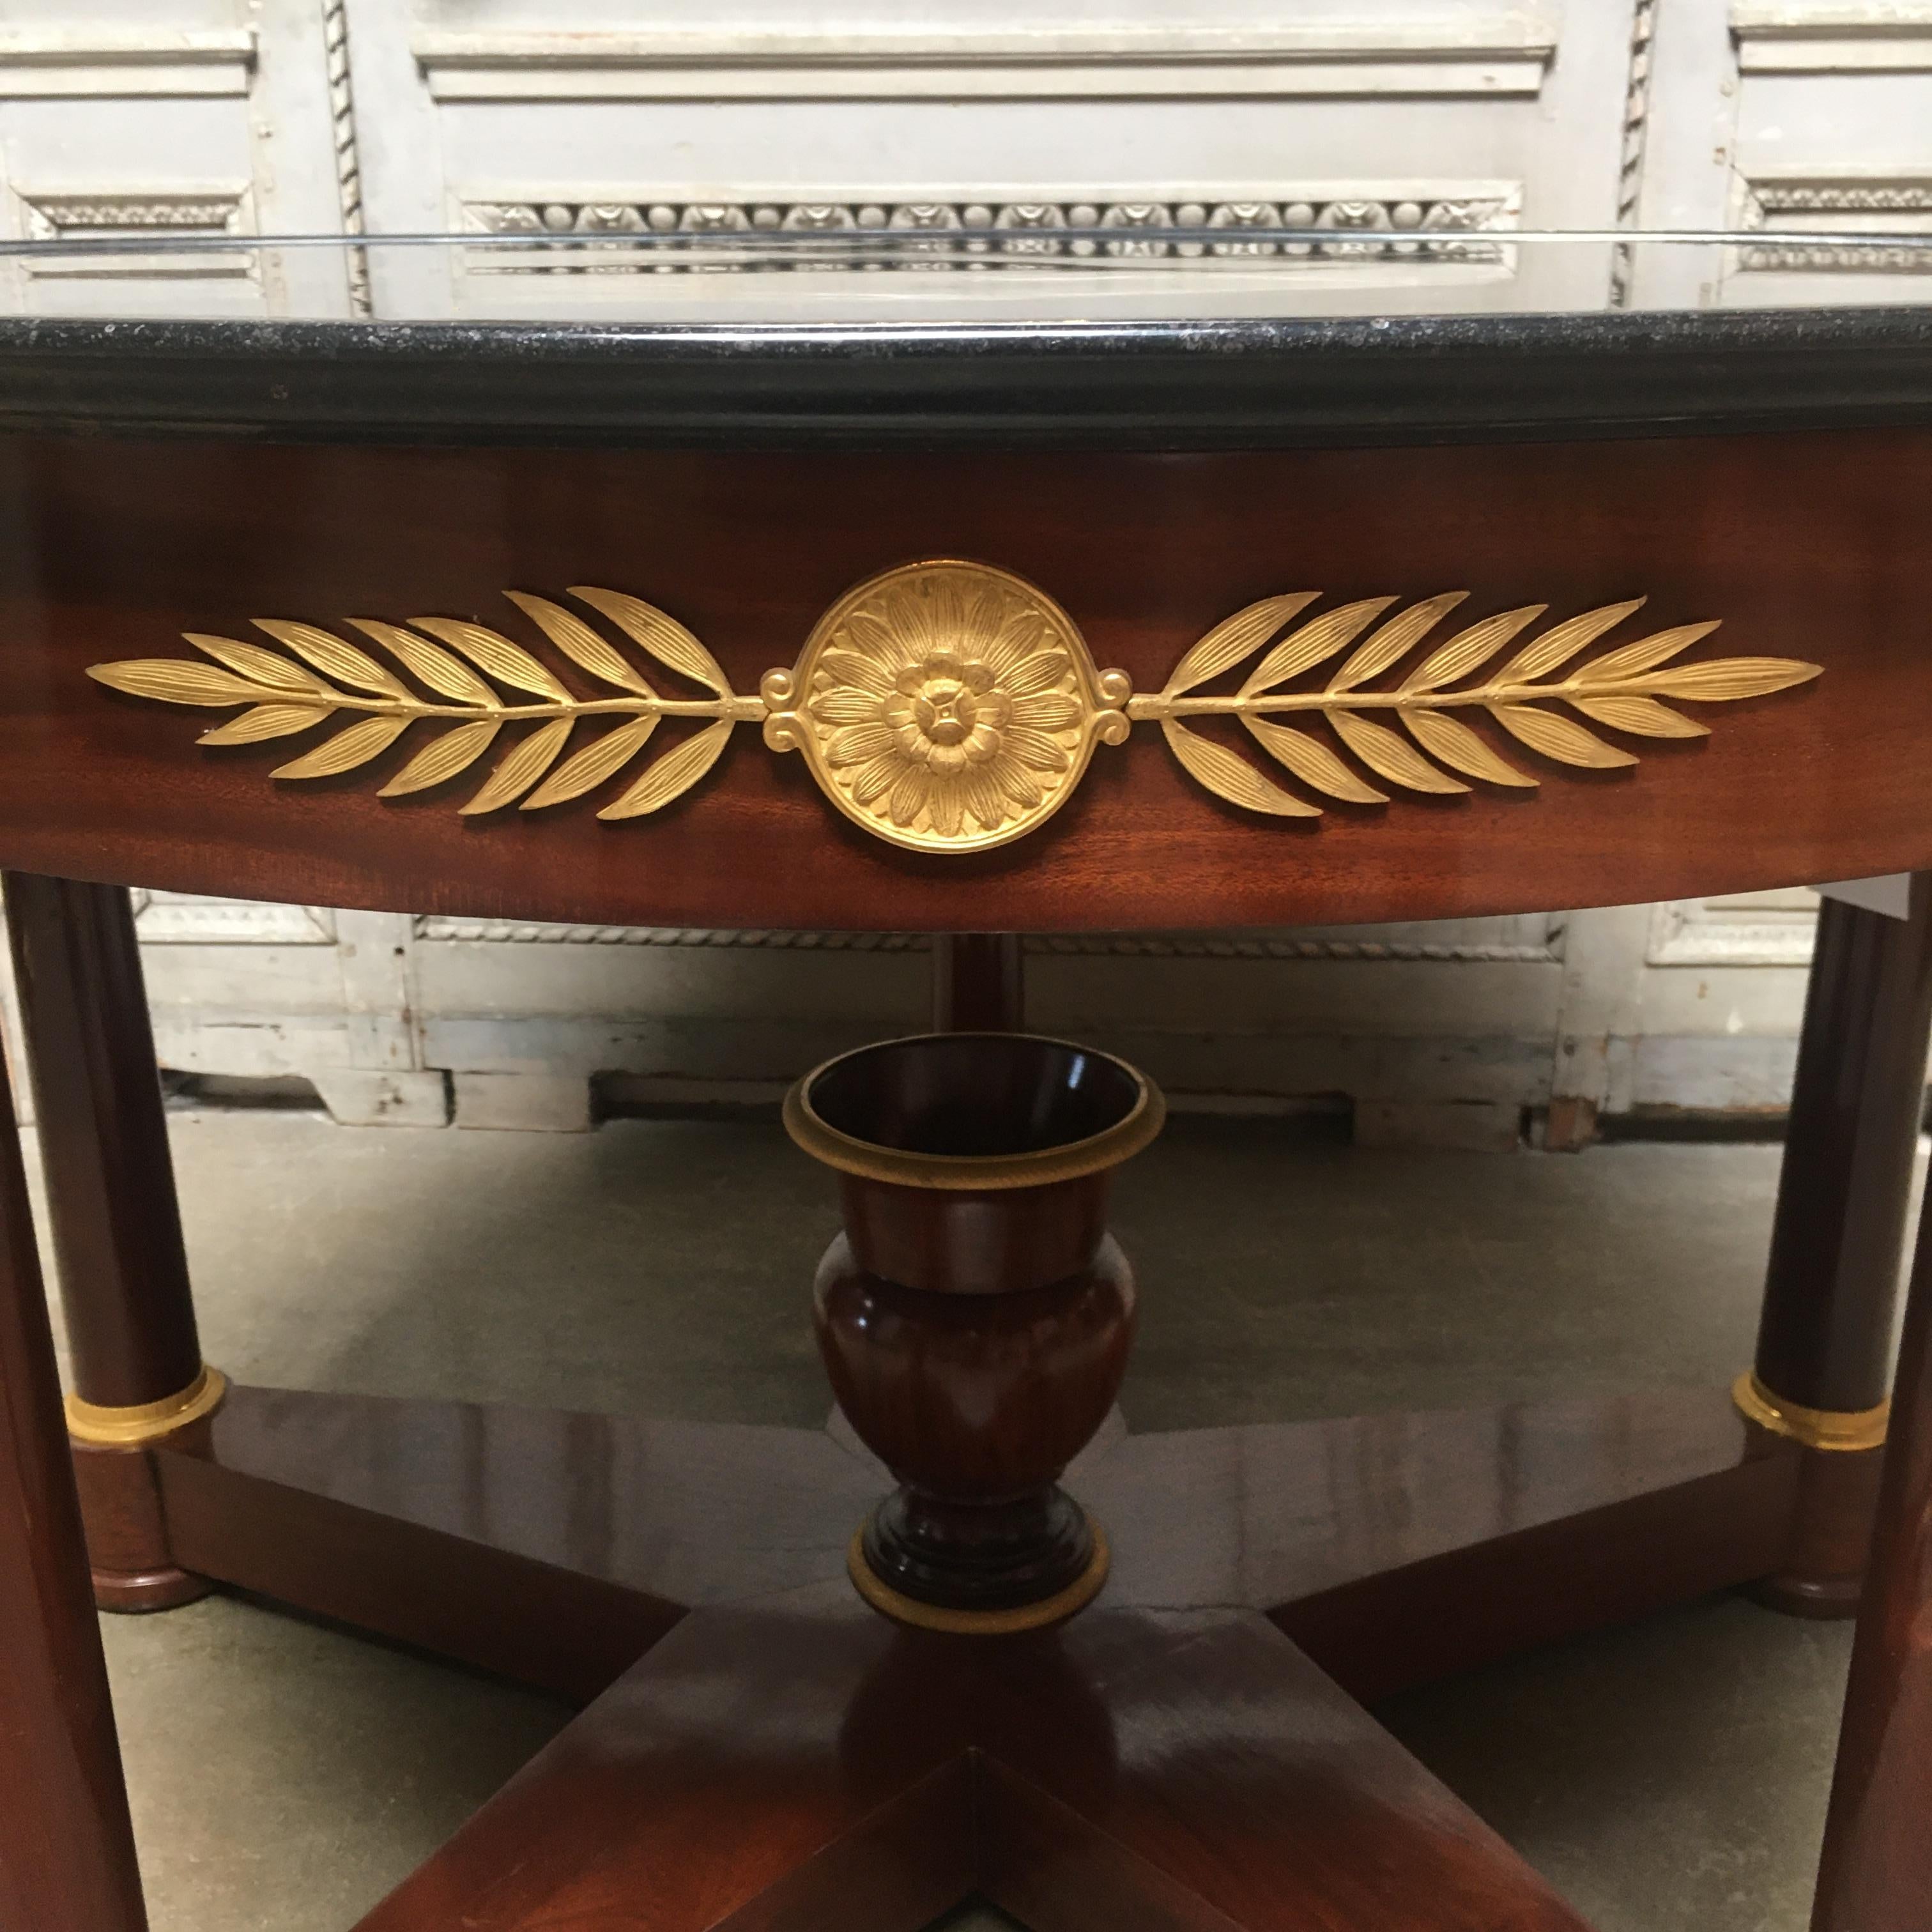 A French 19th Century Empire mahogany center table with bronze doré mounts and a marble top.  This handsome table features beautifully executed bronze pieces mounted throughout the apron and legs of the table. The Empire table has a center urn